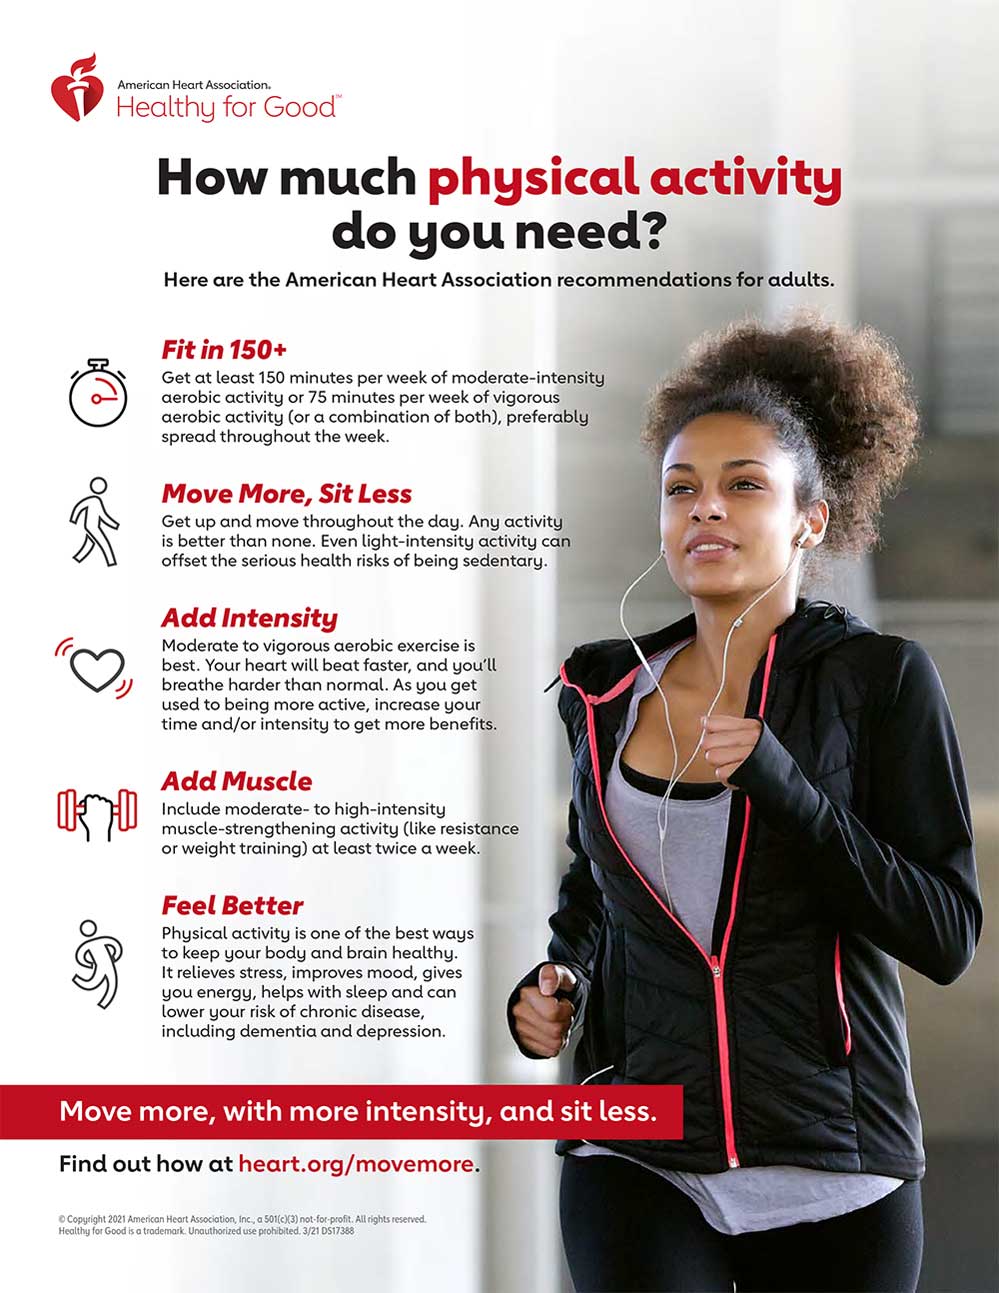 AHA Physical Activity Recommendations Infographic Image